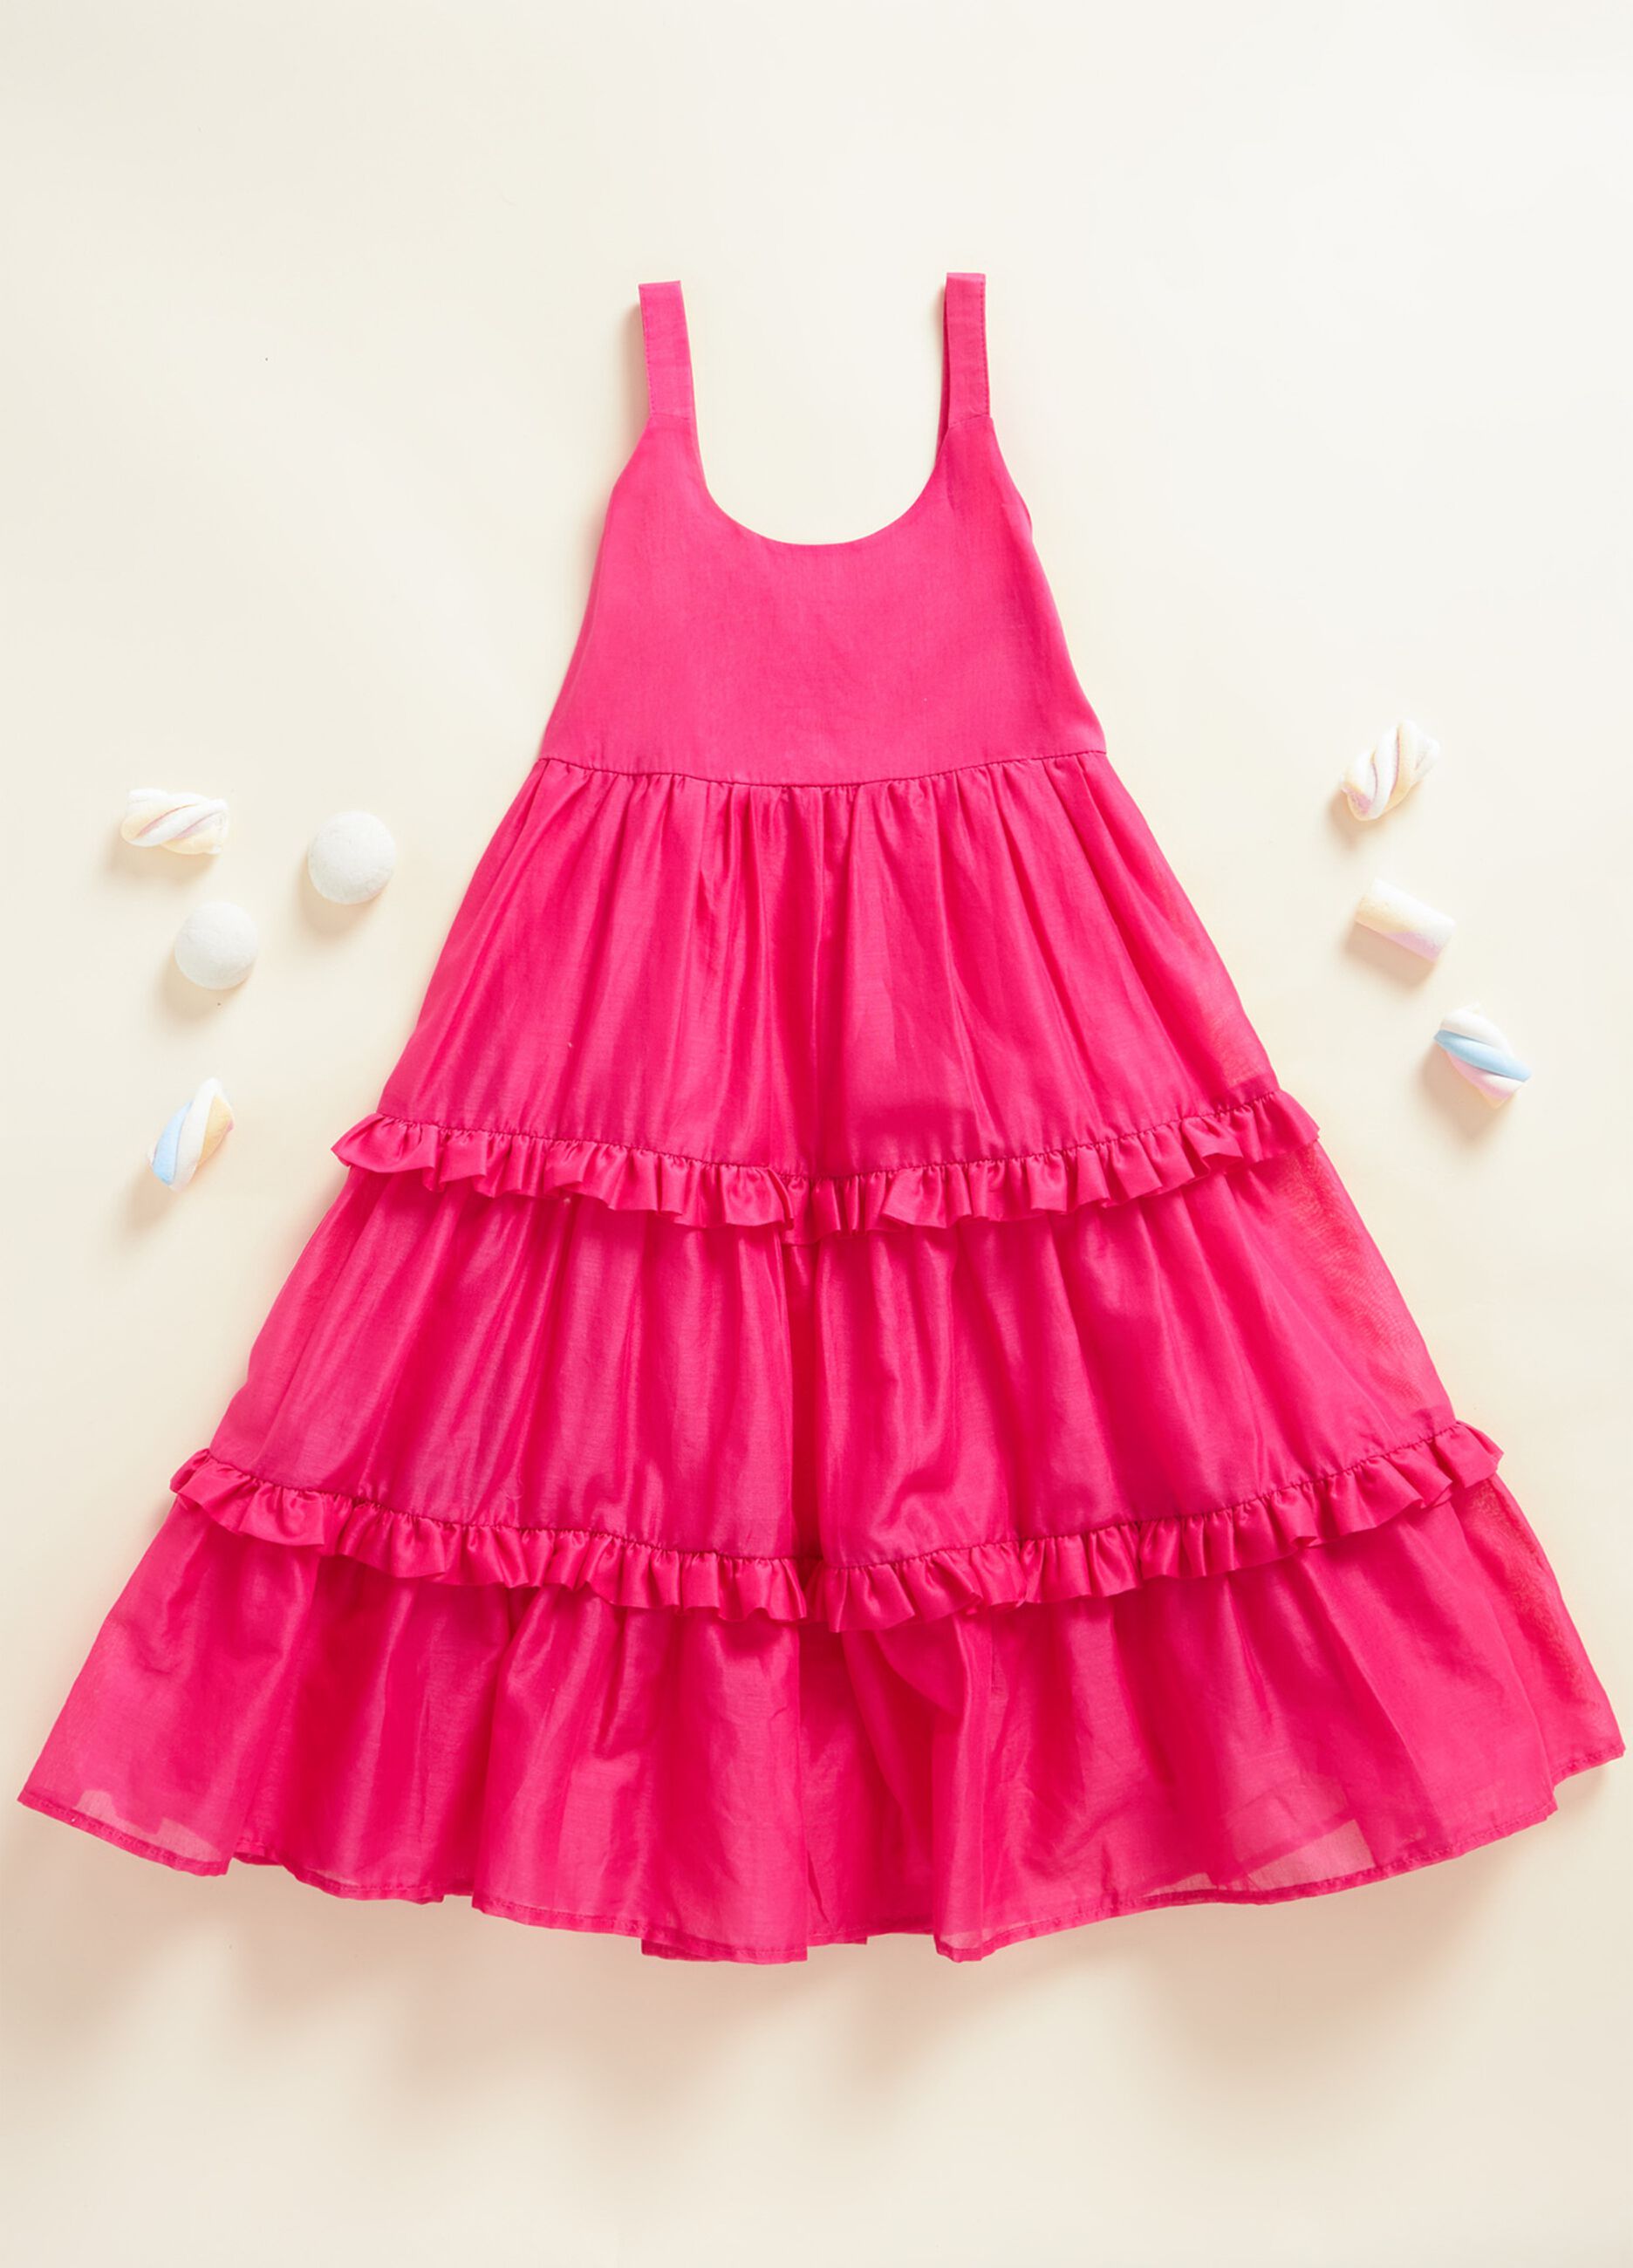 IANA tiered dress in 100% cotton